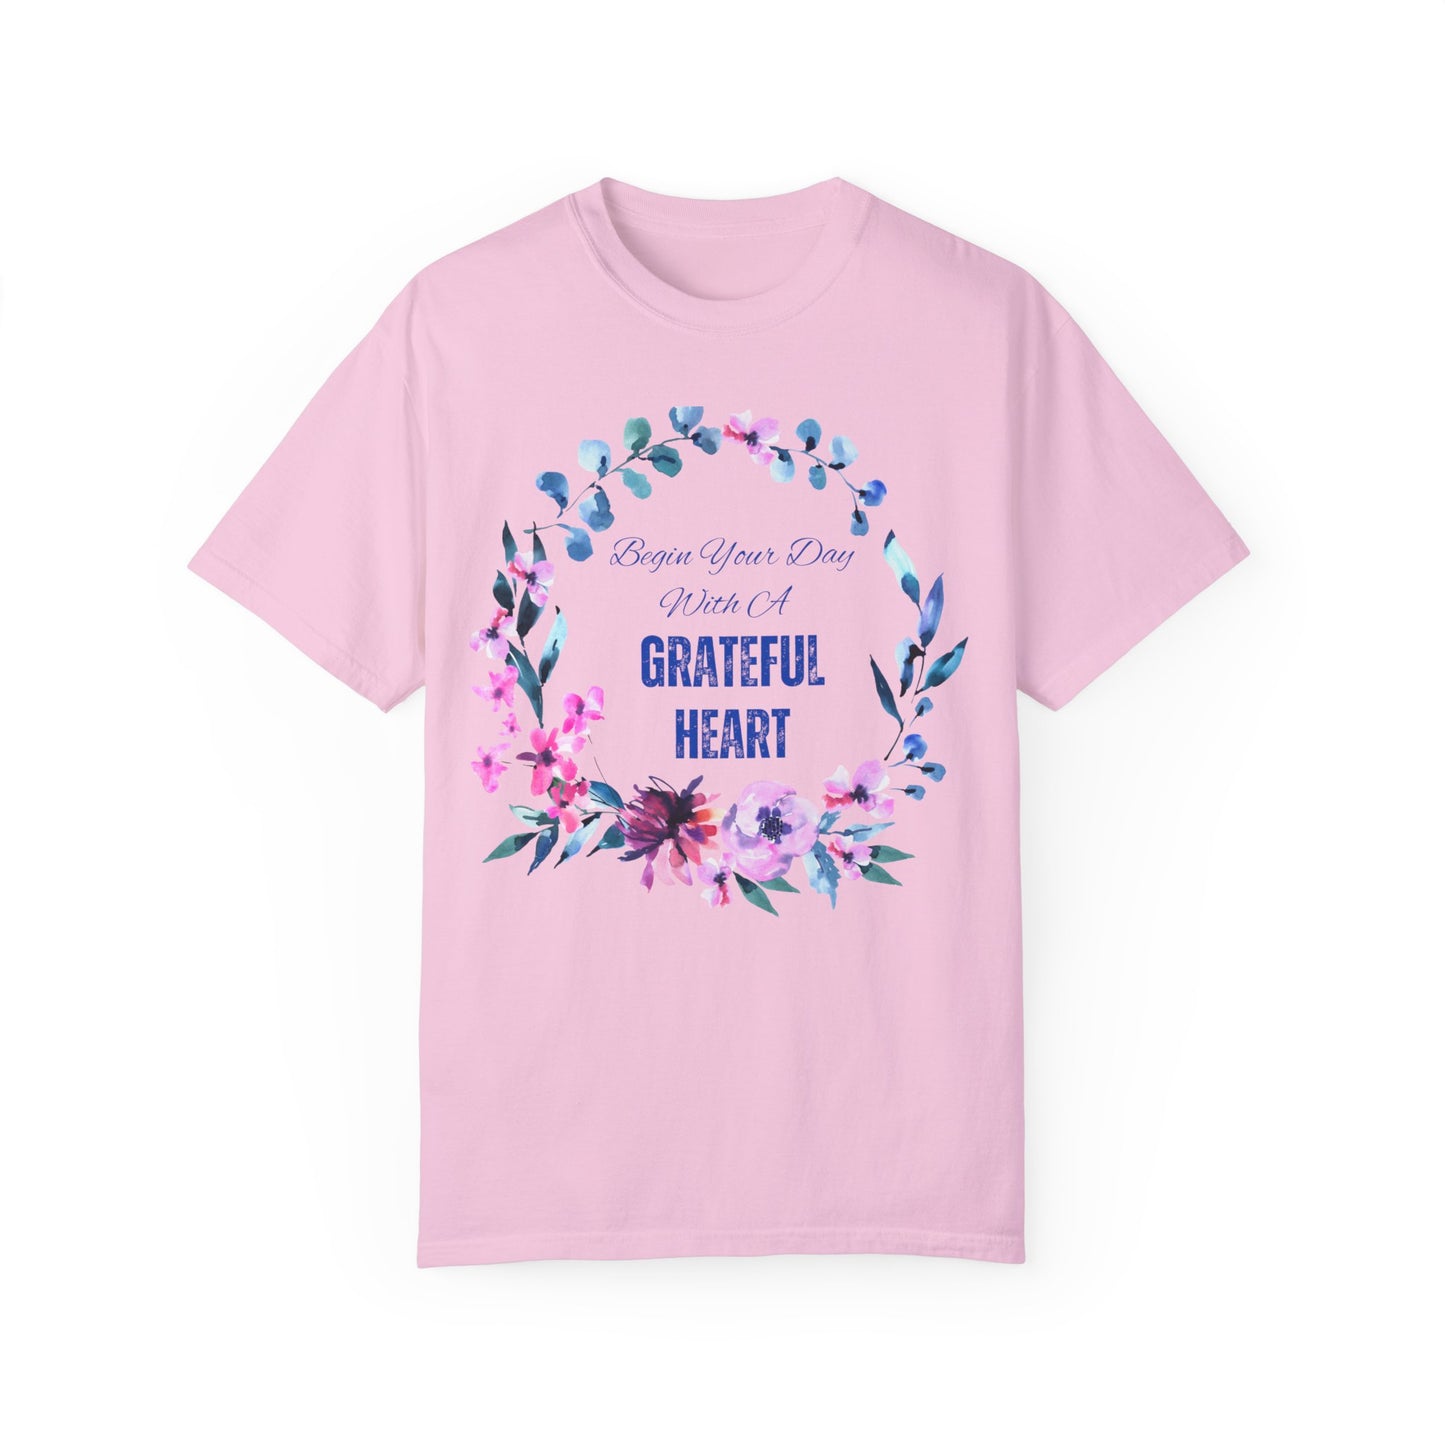 Begin Your Day With A Grateful Heart Garment-Dyed T-shirt, Inspirational Tshirt, Tshirt With Flower Wreath, Gifts For Her, Colorful T-Shirt